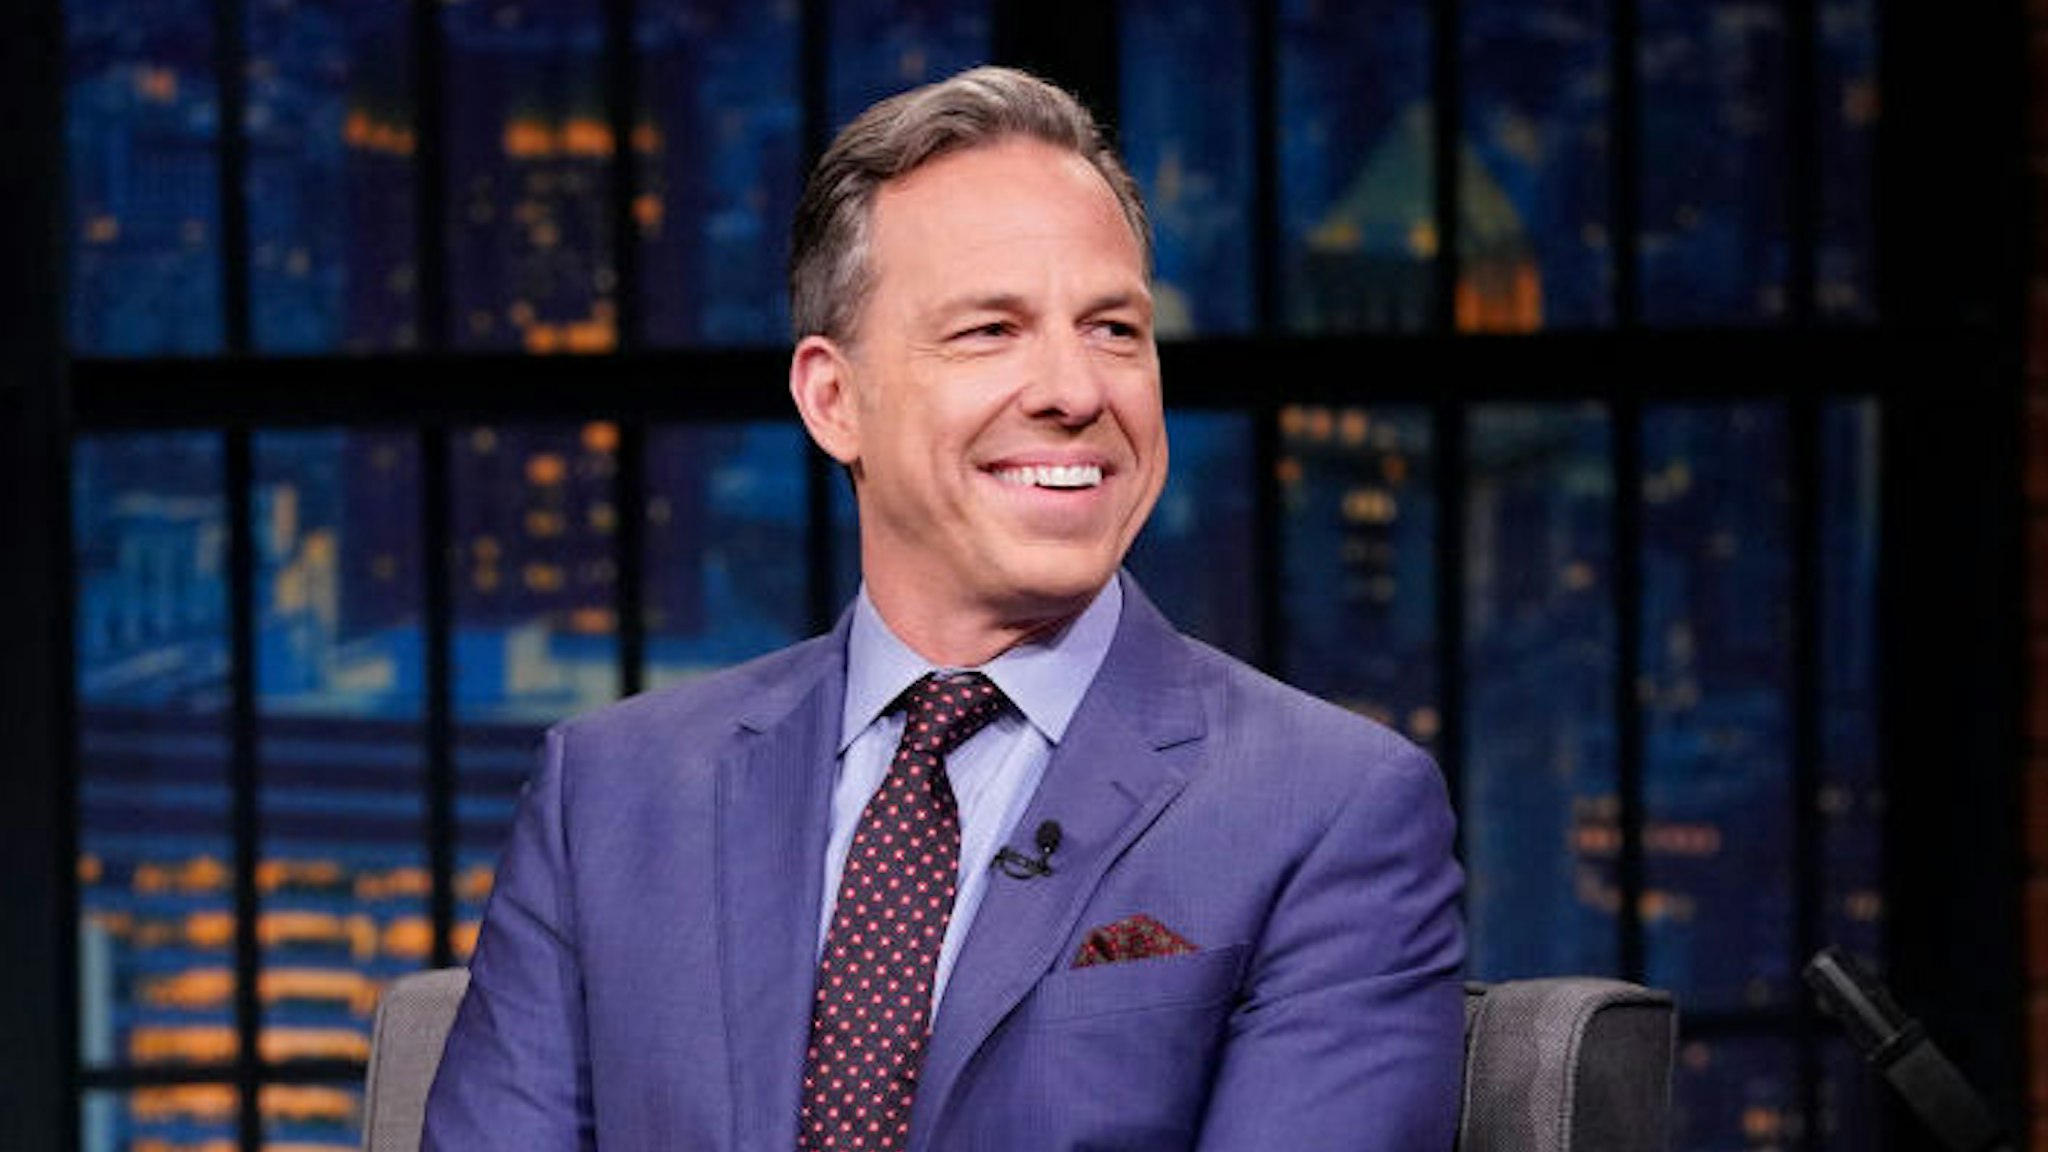 CNN's Jake Tapper during an interview with host Seth Meyers on August 15, 2019 -- (Photo by: Lloyd Bishop/NBC/NBCU Photo Bank)